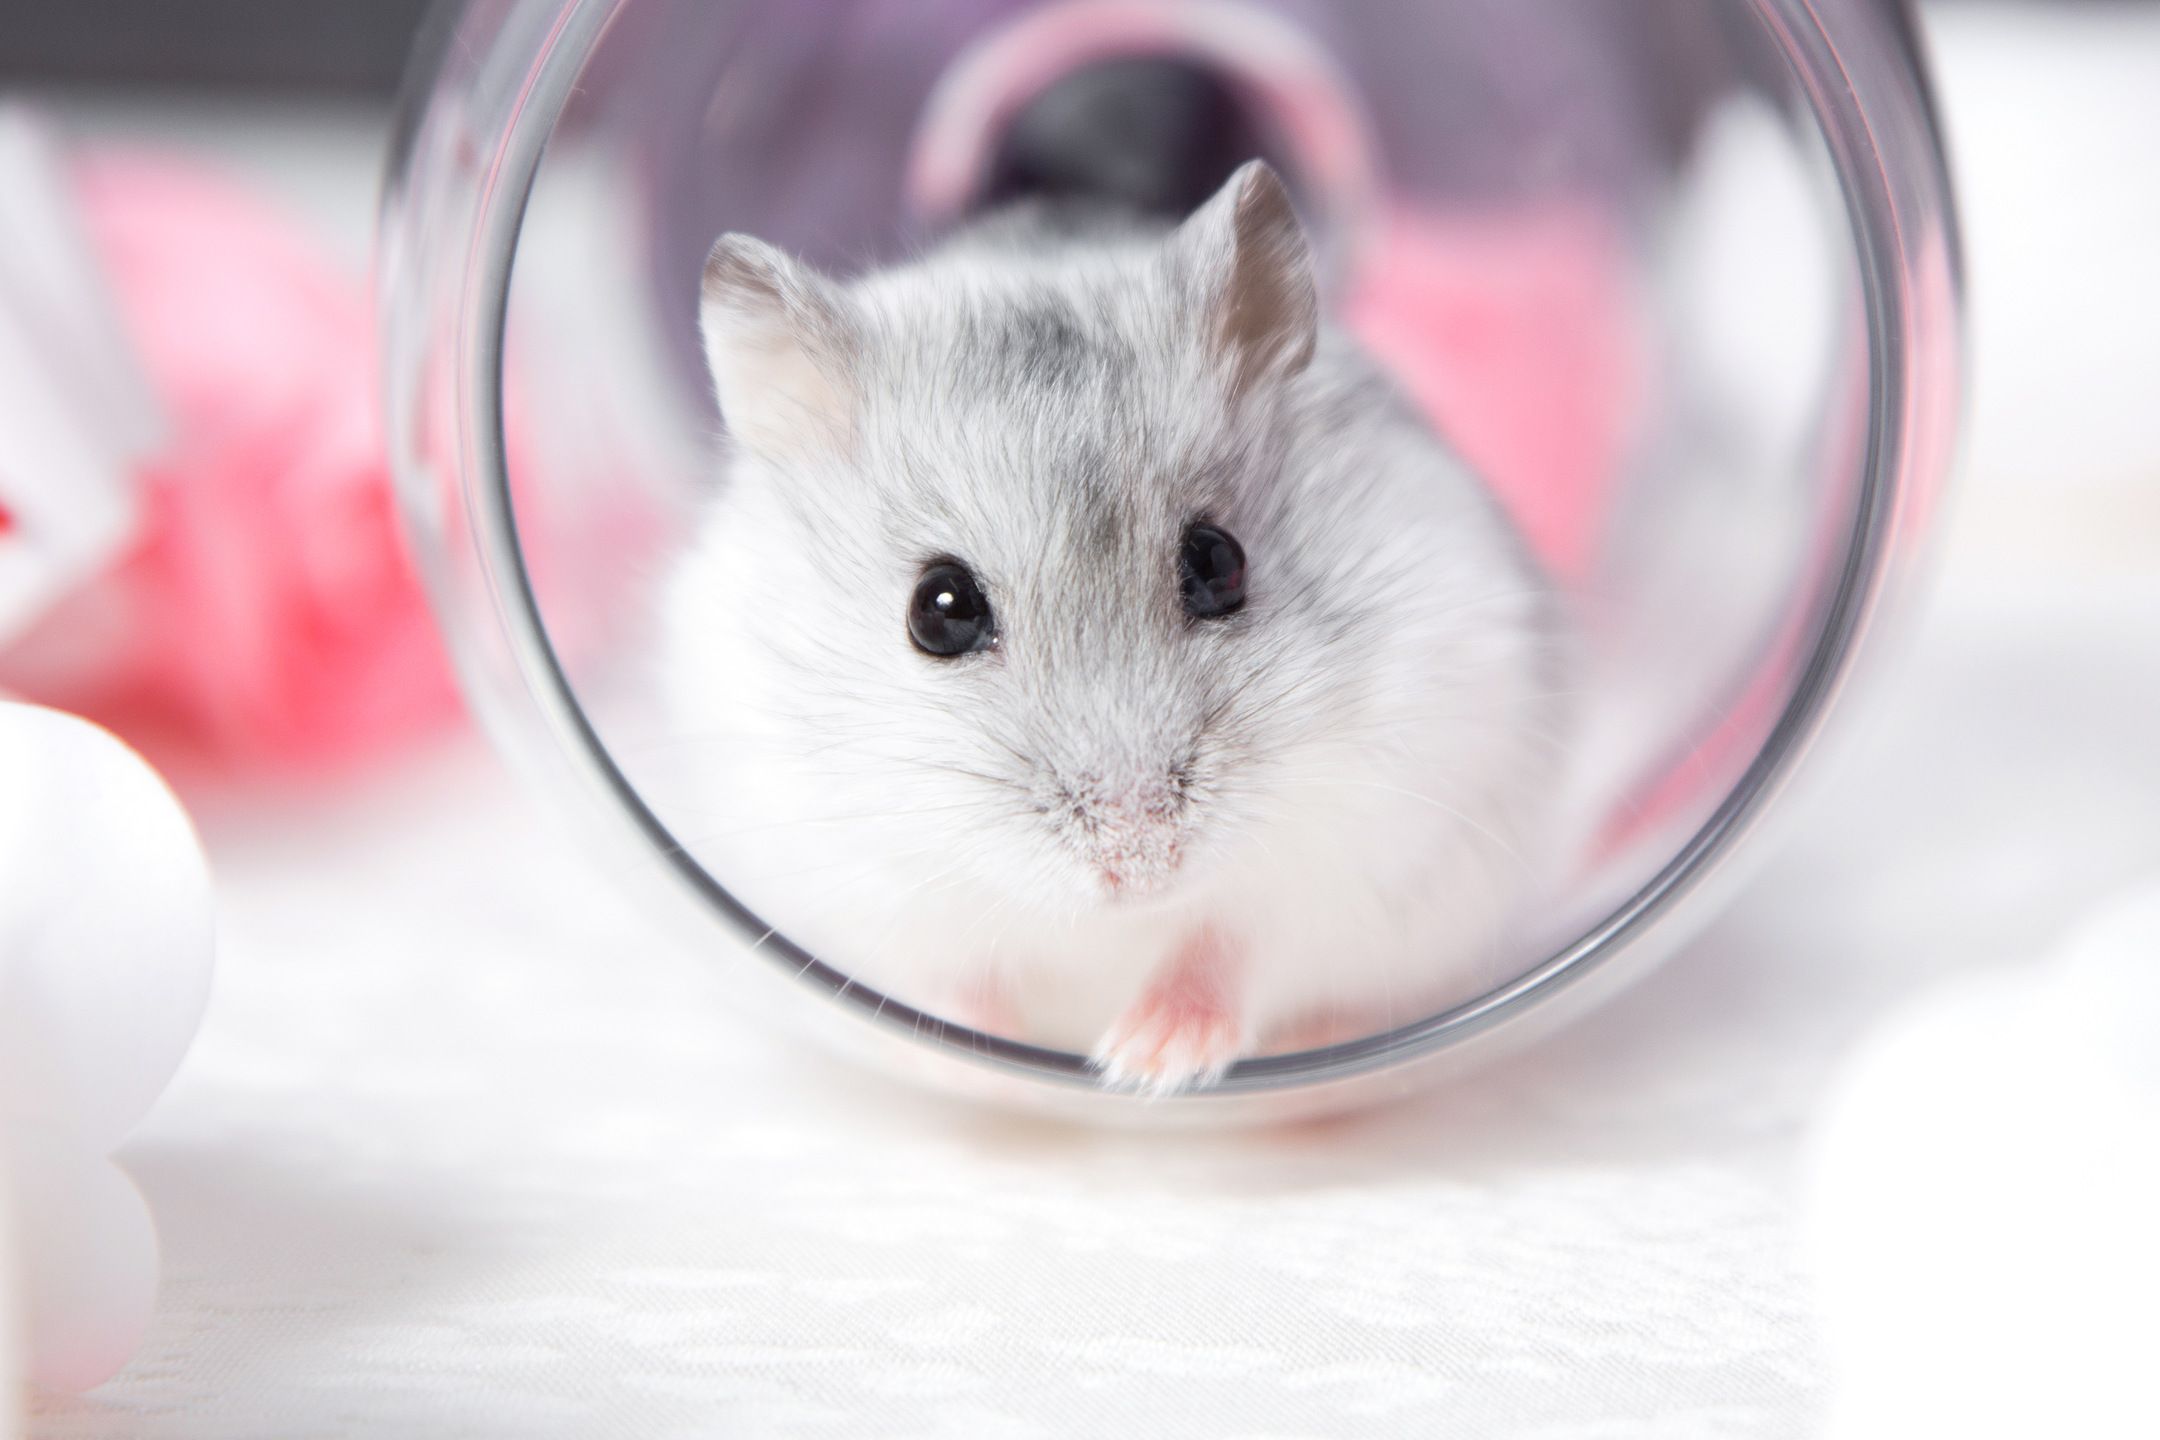 Hamster Facts You Probably Didn't Know